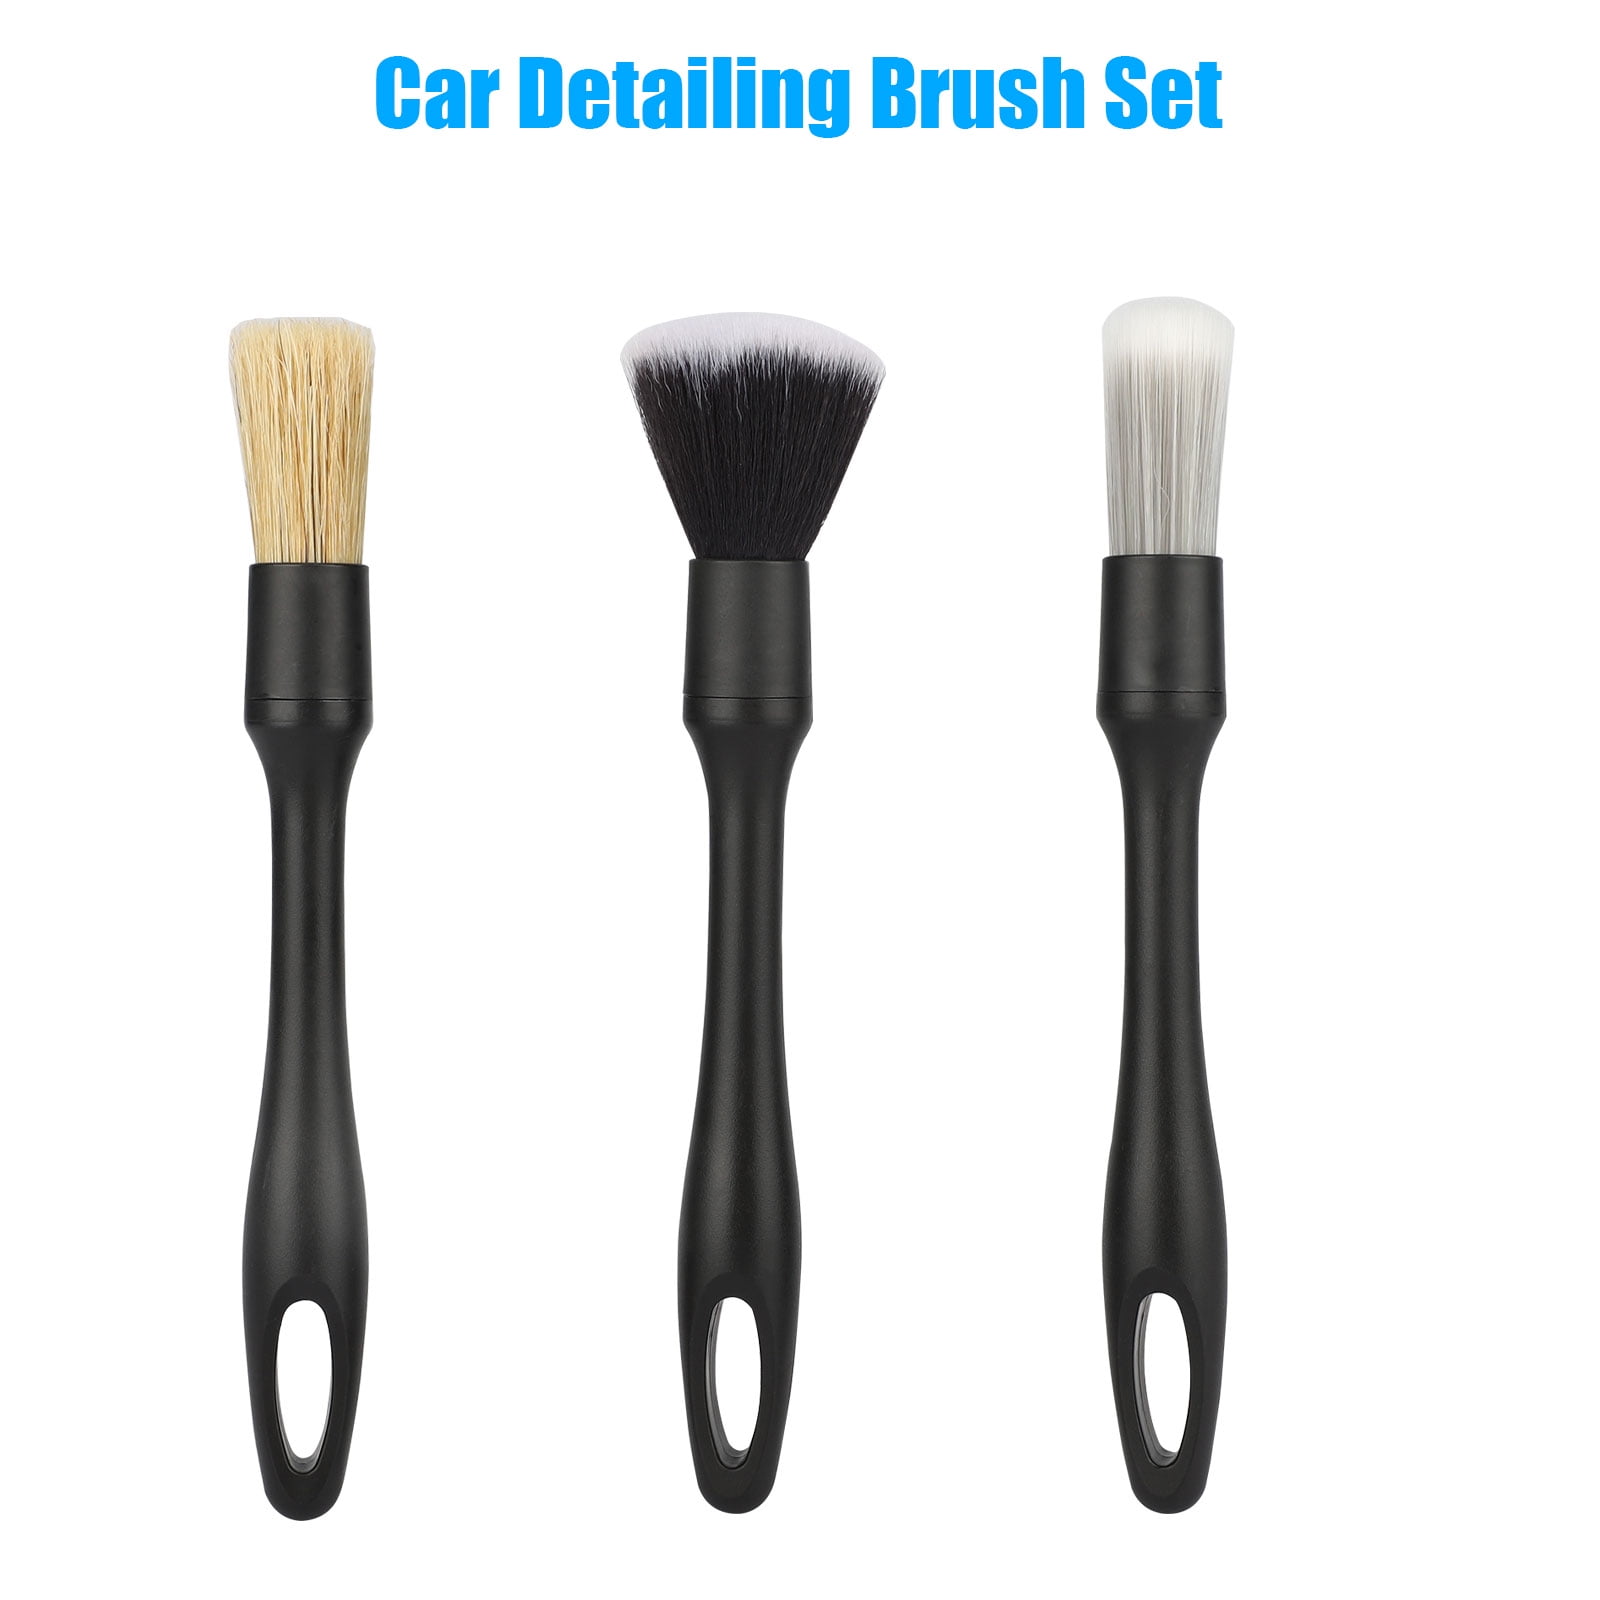  Cuoreca 23pcs Car Detailing Kit Interior and Exterior Cleaner,  Car Cleaning Kit with Professional Car Detailing Brush Set, Car Wash Kit  and Auto Detailing Kit. Reusable, Perfect for Cars and Bikes 